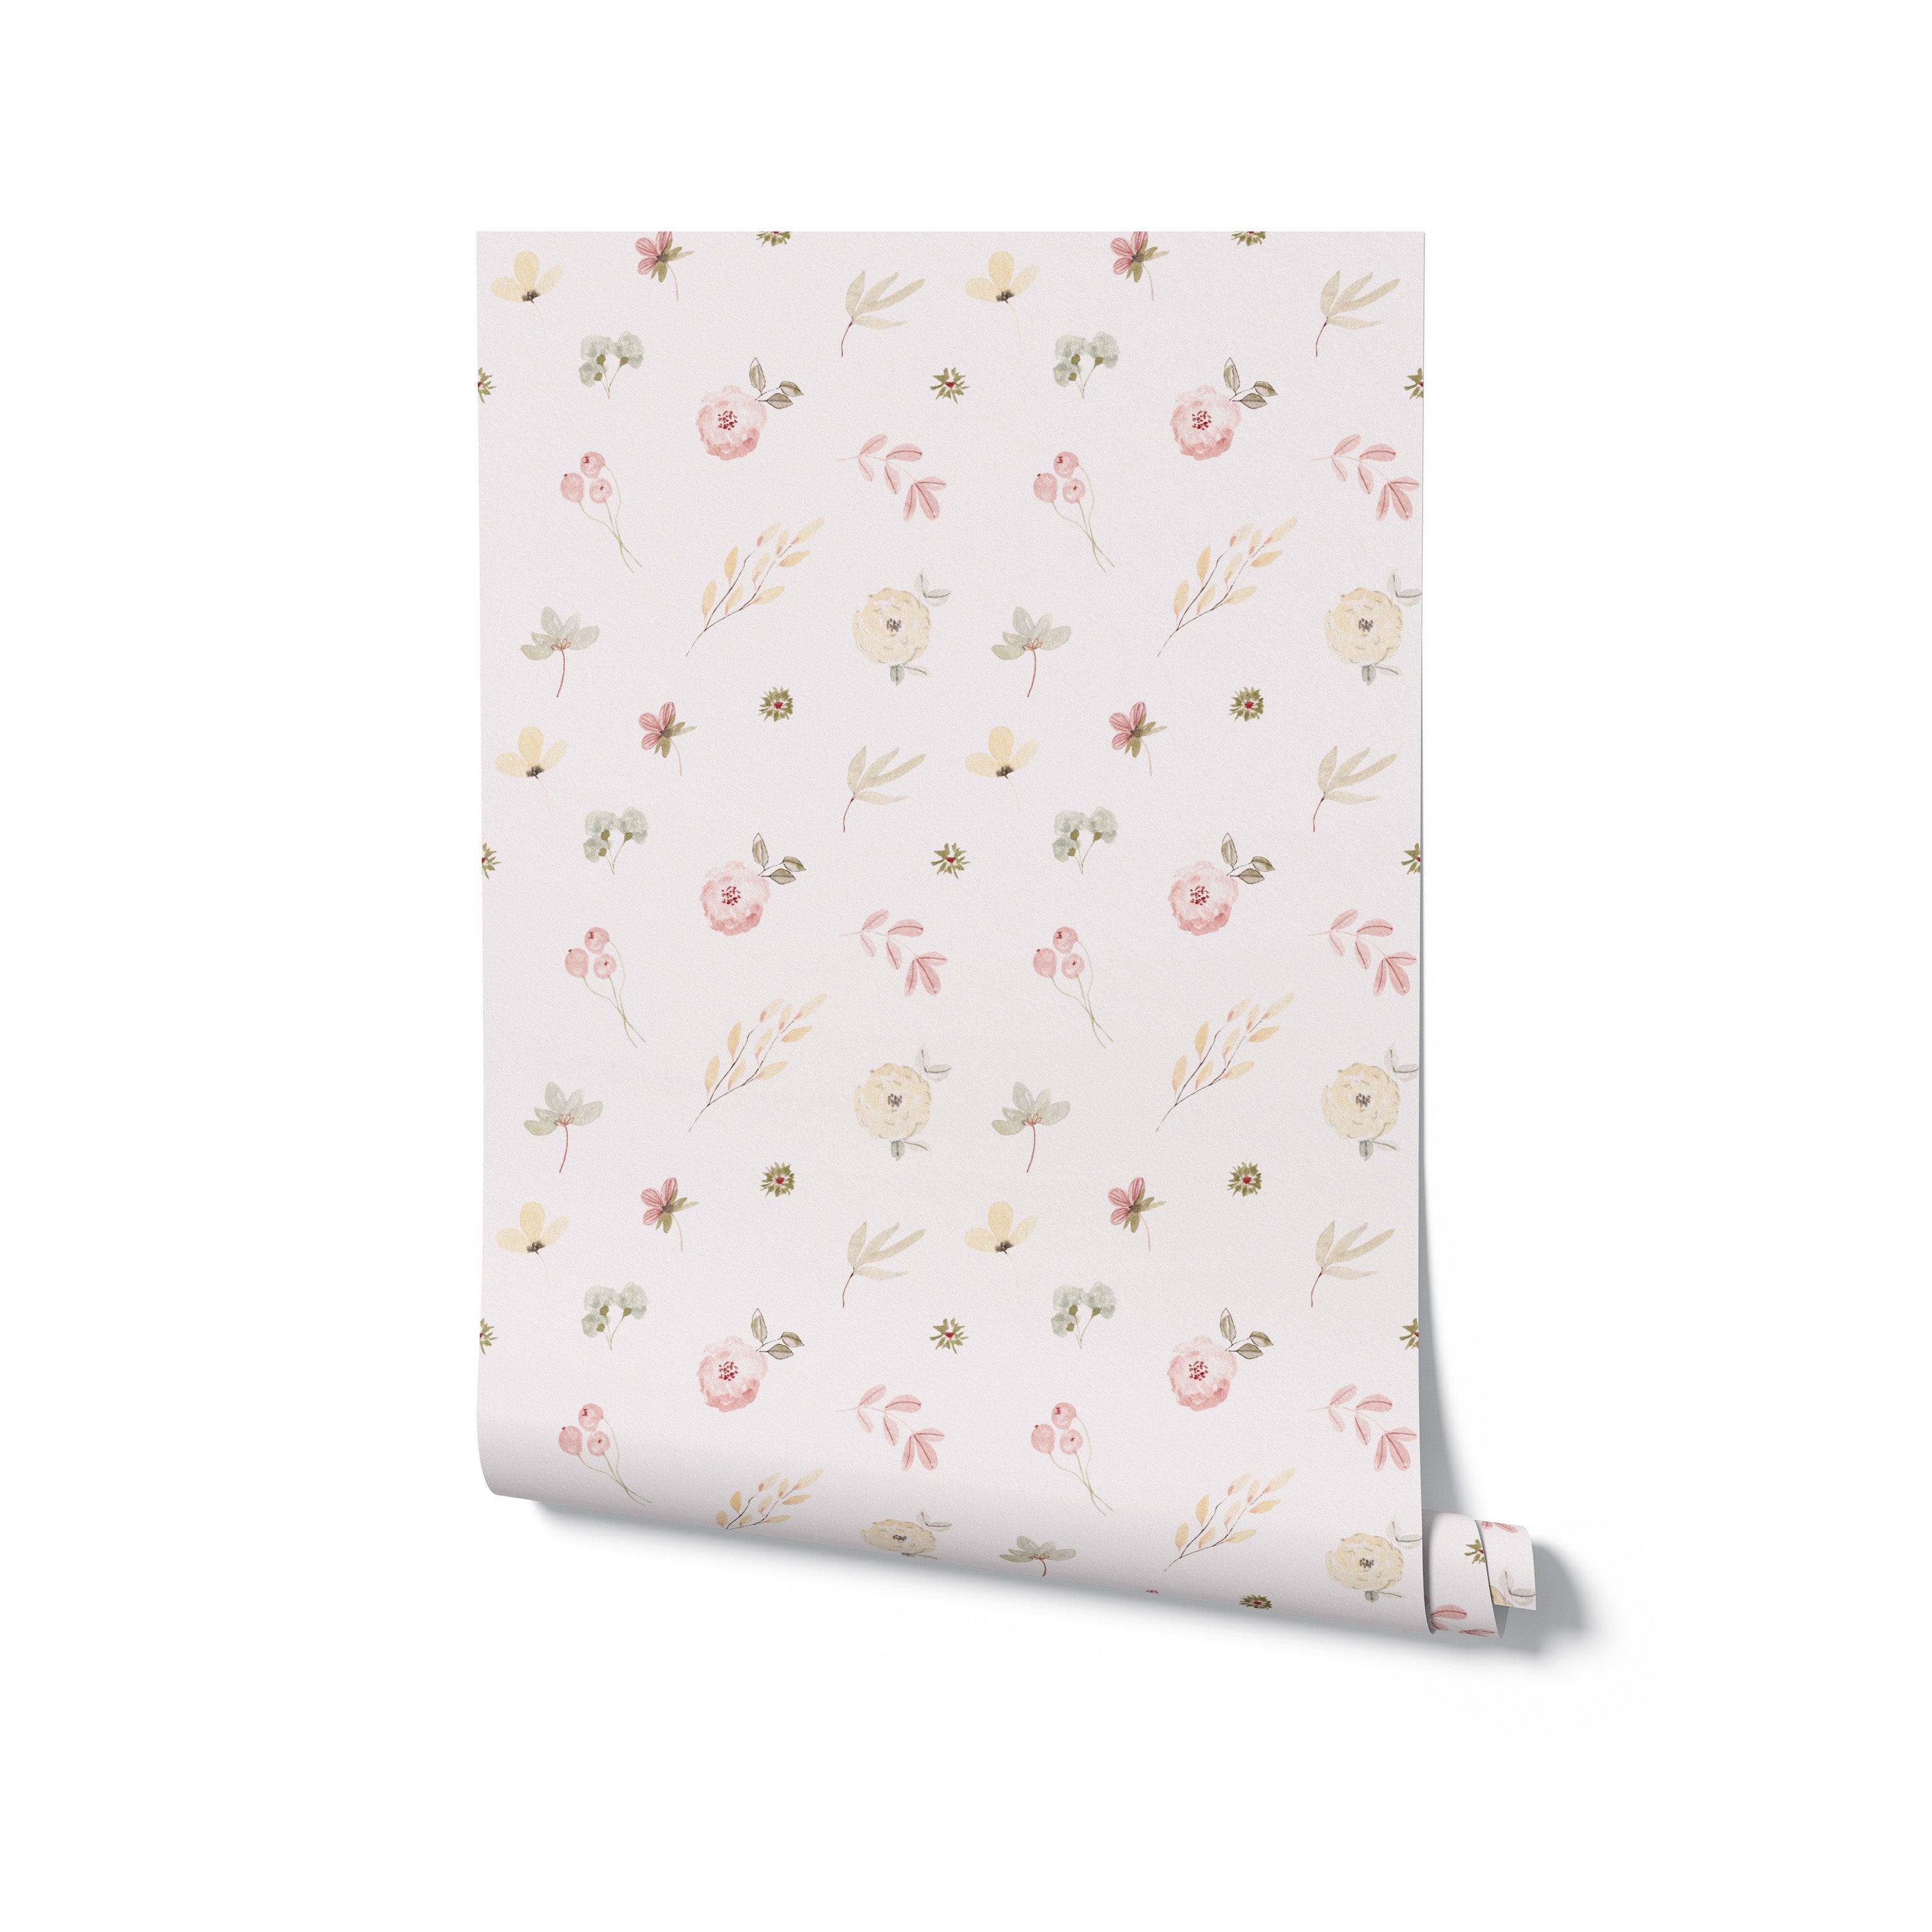 A rolled-up piece of Pink Watercolour Floral Wallpaper II showing a pattern of small, scattered flowers in soft pink, green, and beige tones. The wallpaper has a gentle, pastel aesthetic suitable for soothing room decor.